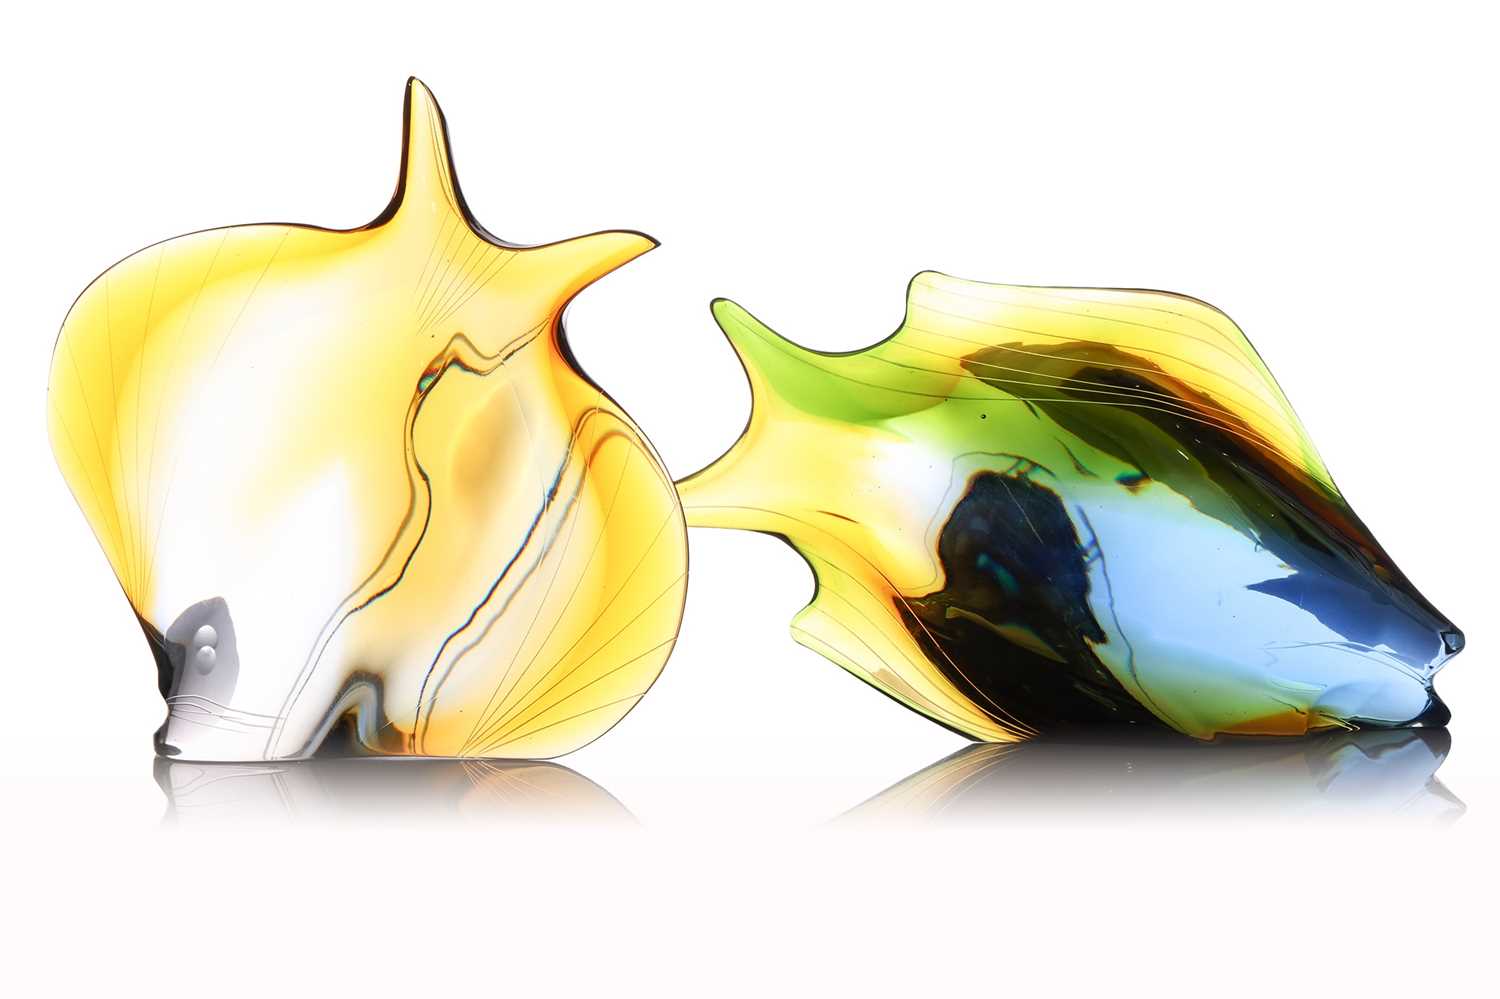 Rozinek and Honzik for Exbor (Czechoslovakia), two glass fish sculptures, of differing form in - Image 2 of 4